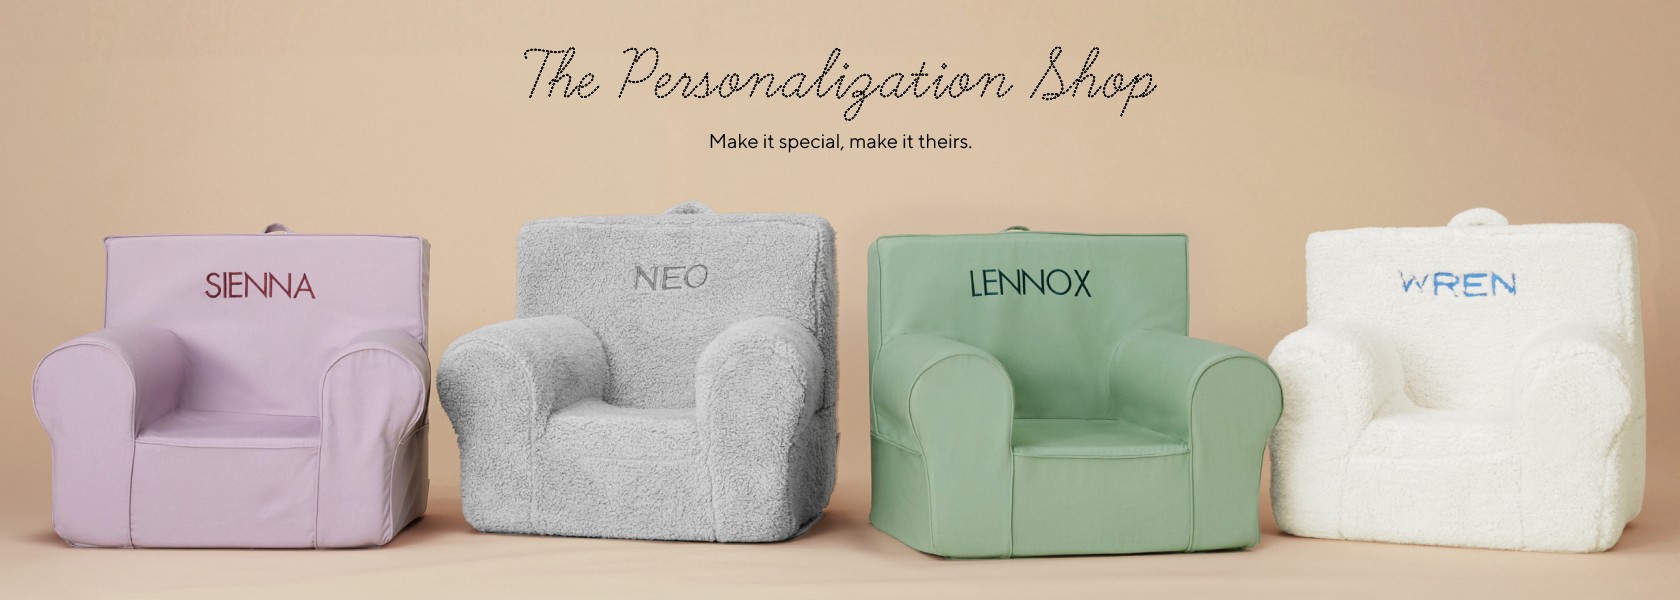 The personalization shop